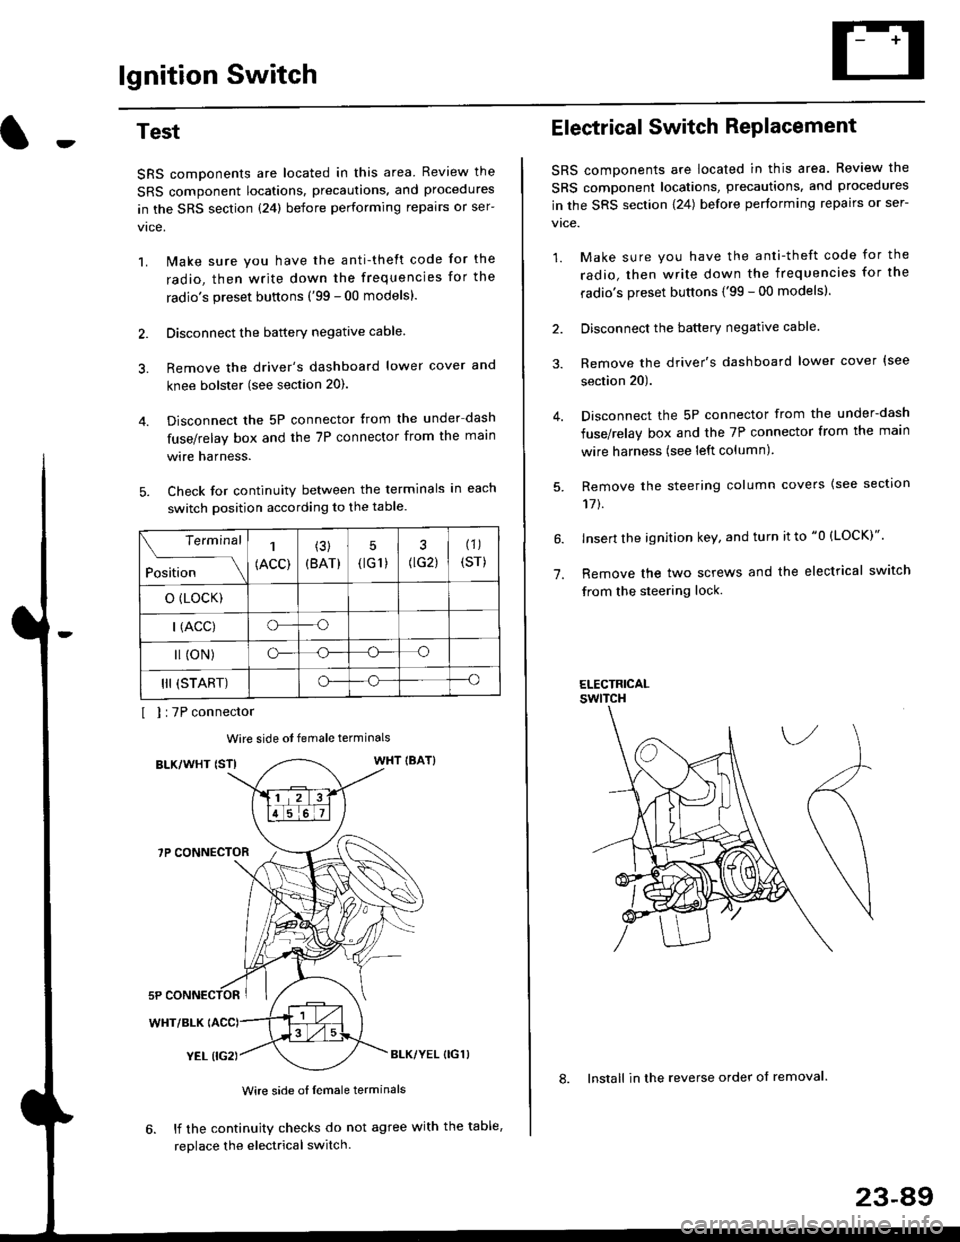 HONDA CIVIC 1998 6.G Workshop Manual lgnition Switch
4.
Test
SRS components are located in this area Review the
SRS component locations. precautions. and procedures
in the SRS section {24} before performing repairs or ser-
1. i/ake sure 